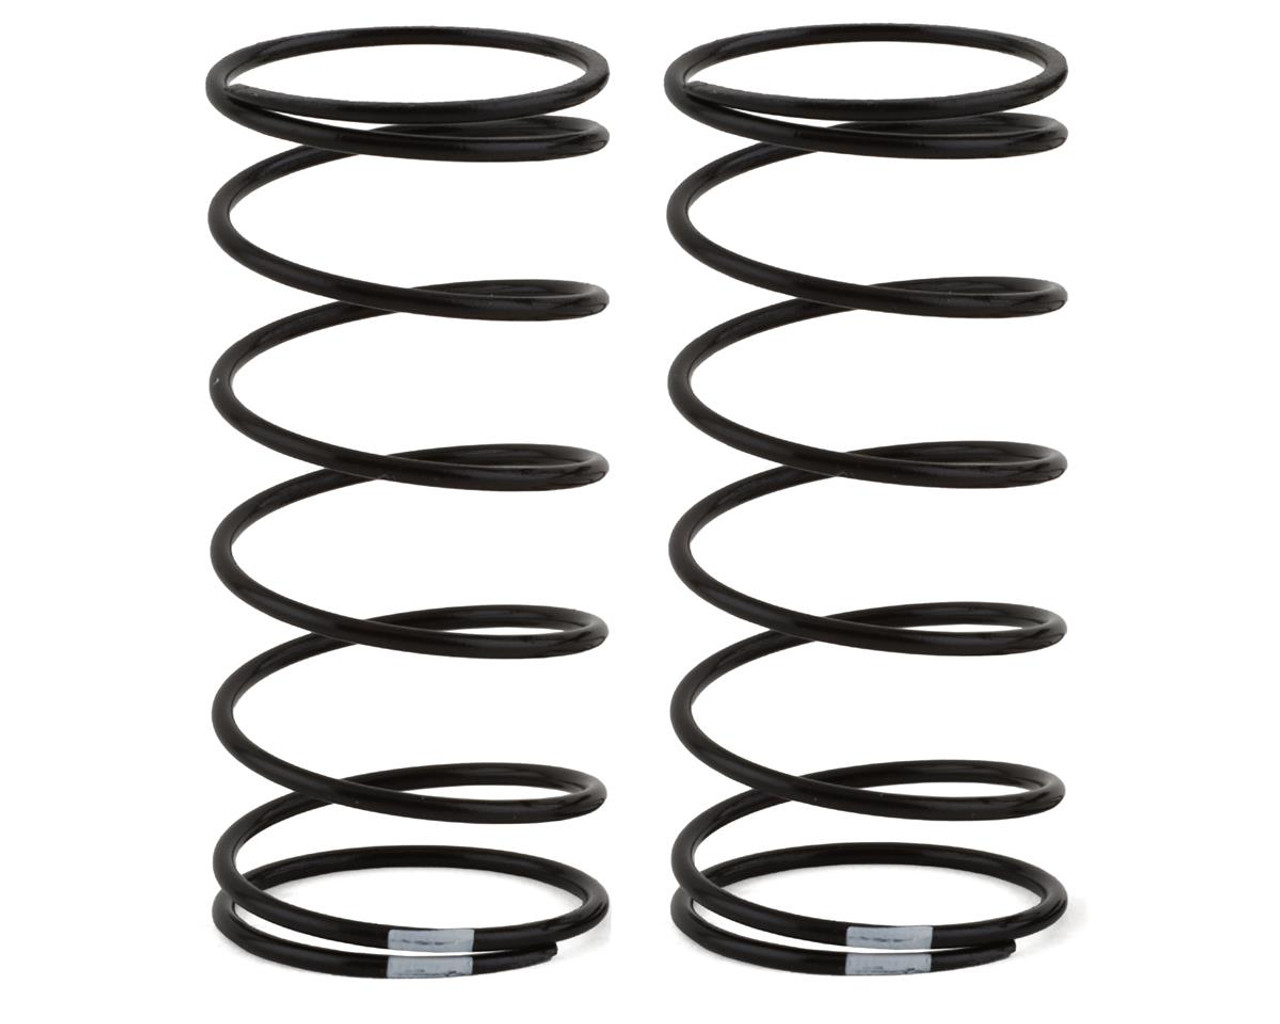 Team Associated 91940 Factory Team 13mm Front Shock Springs White 3.3lb/in, L44, 7.25t, 1.2D, B6.4